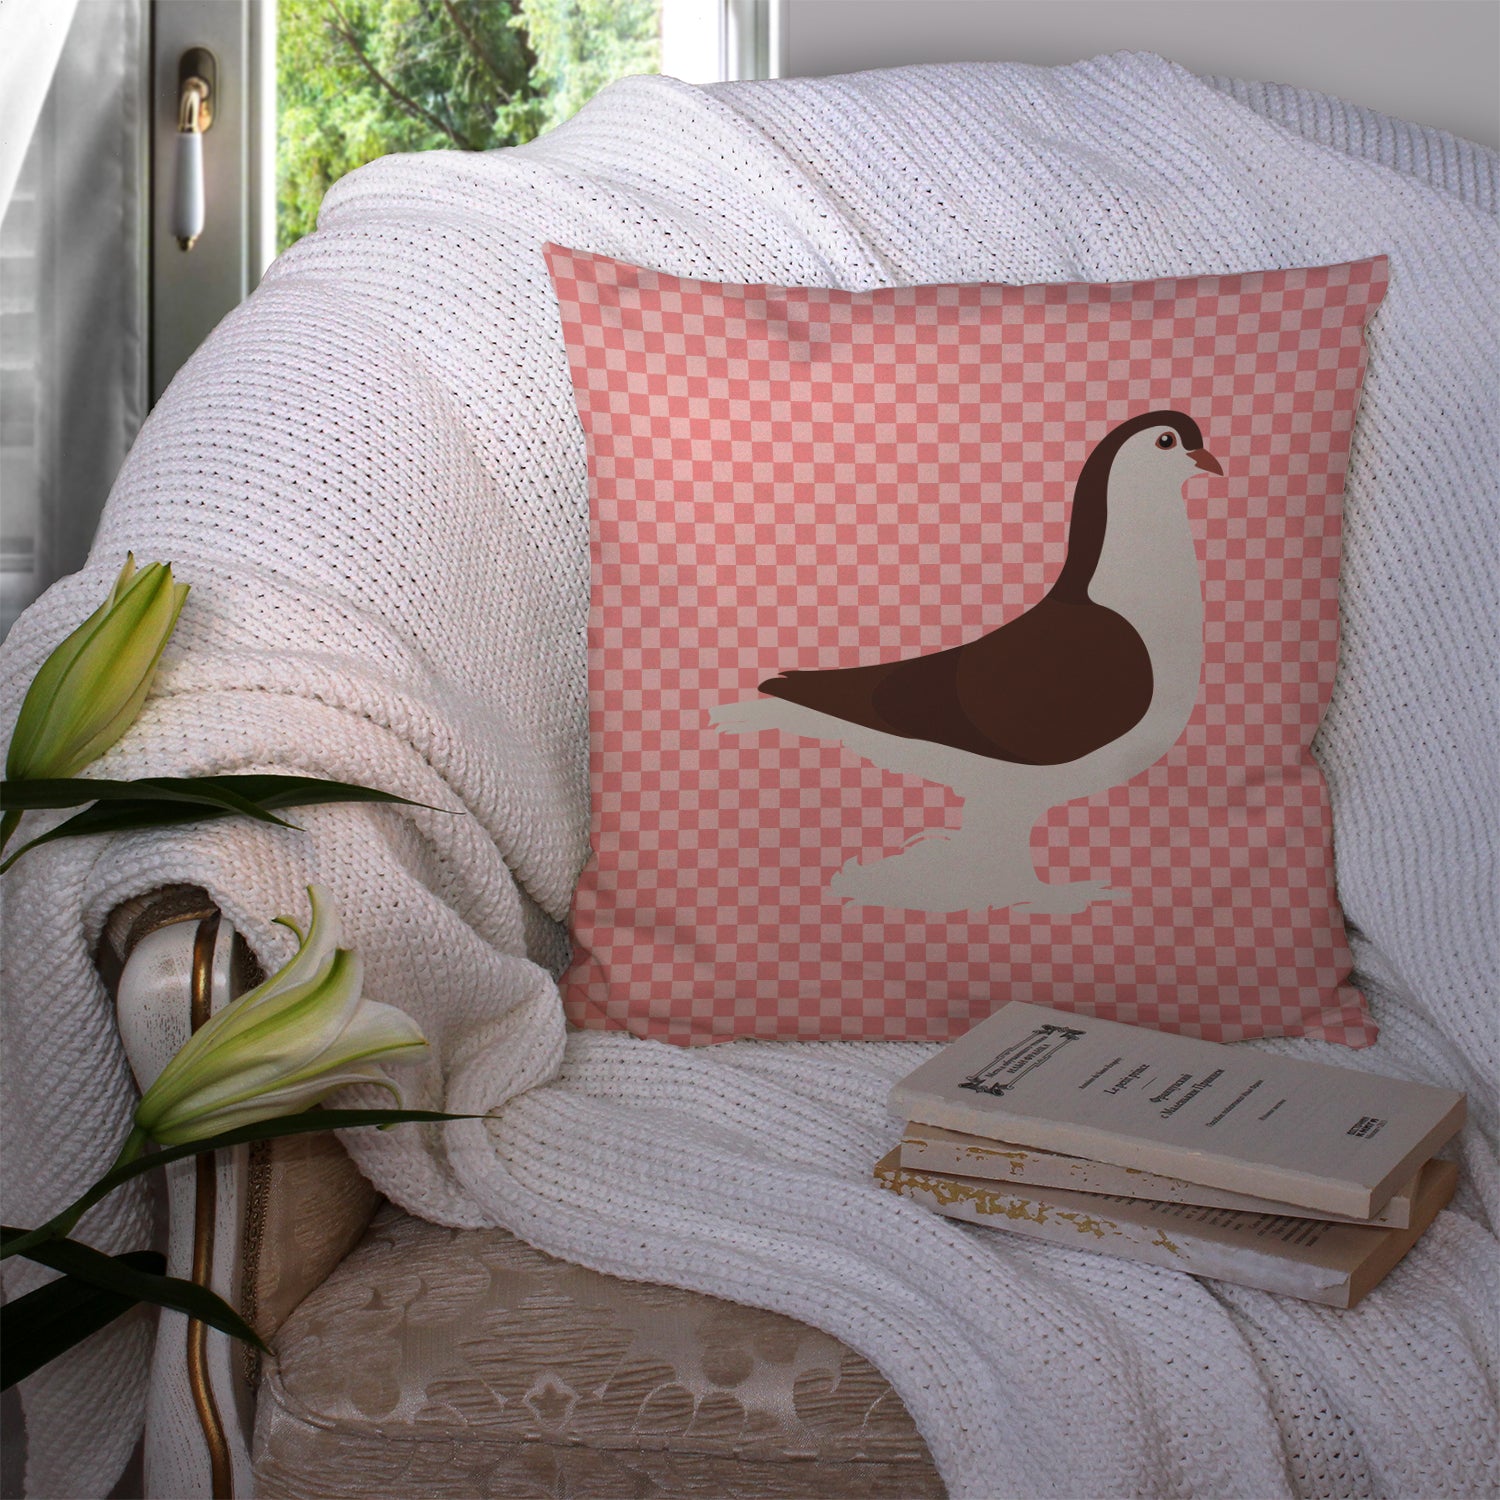 Large Pigeon Pink Check Fabric Decorative Pillow BB7943PW1414 - the-store.com